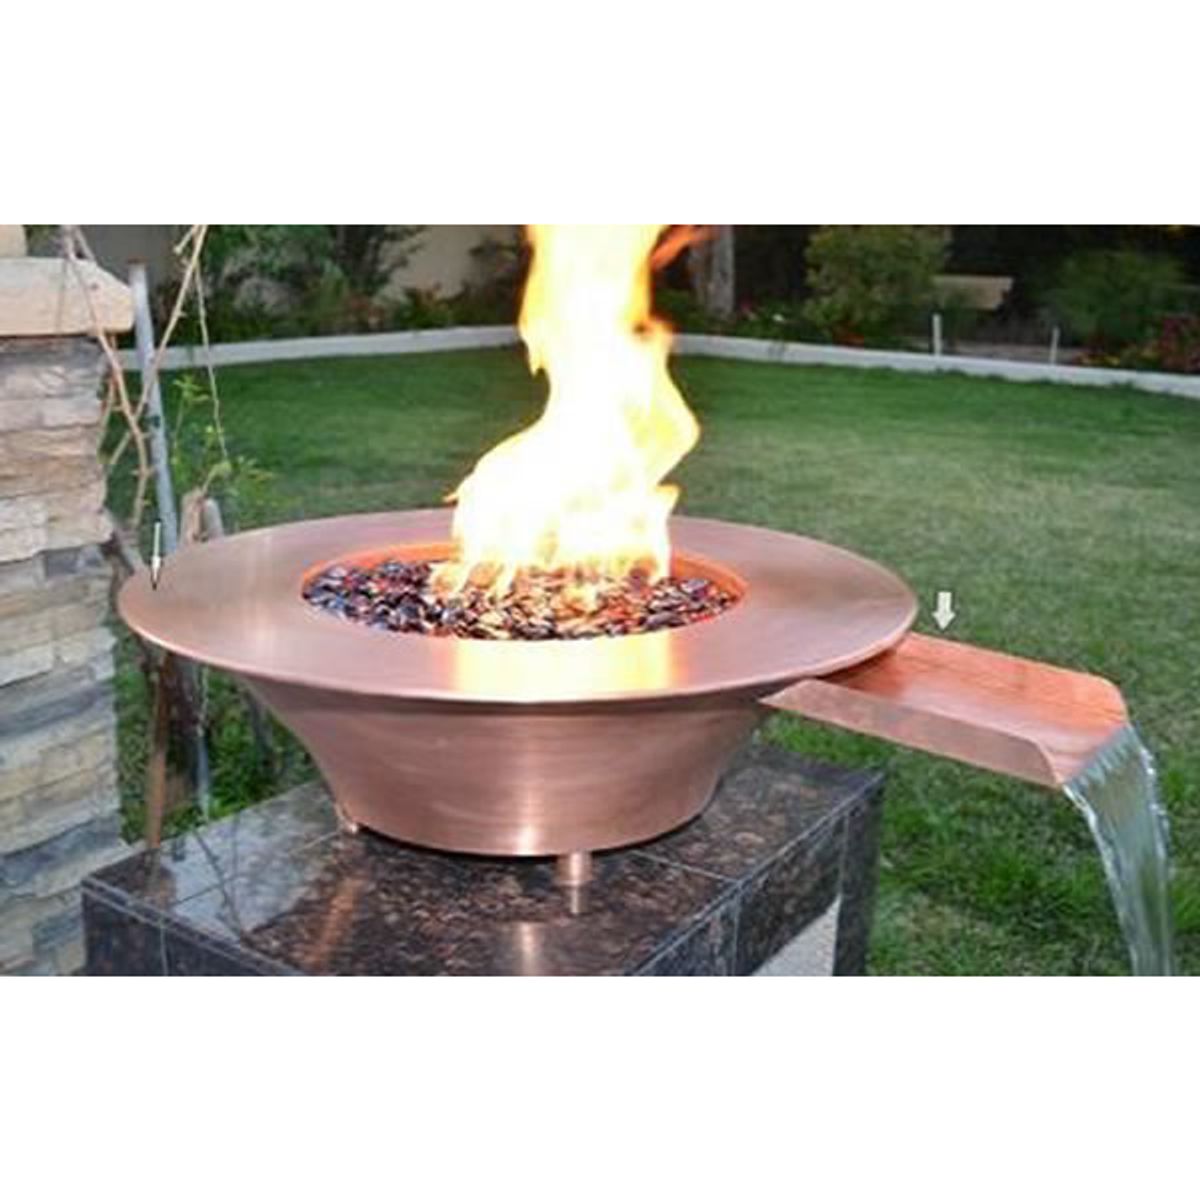 36"x12" Copper Fire & Water Bowl w/Electronic Ignition - NG